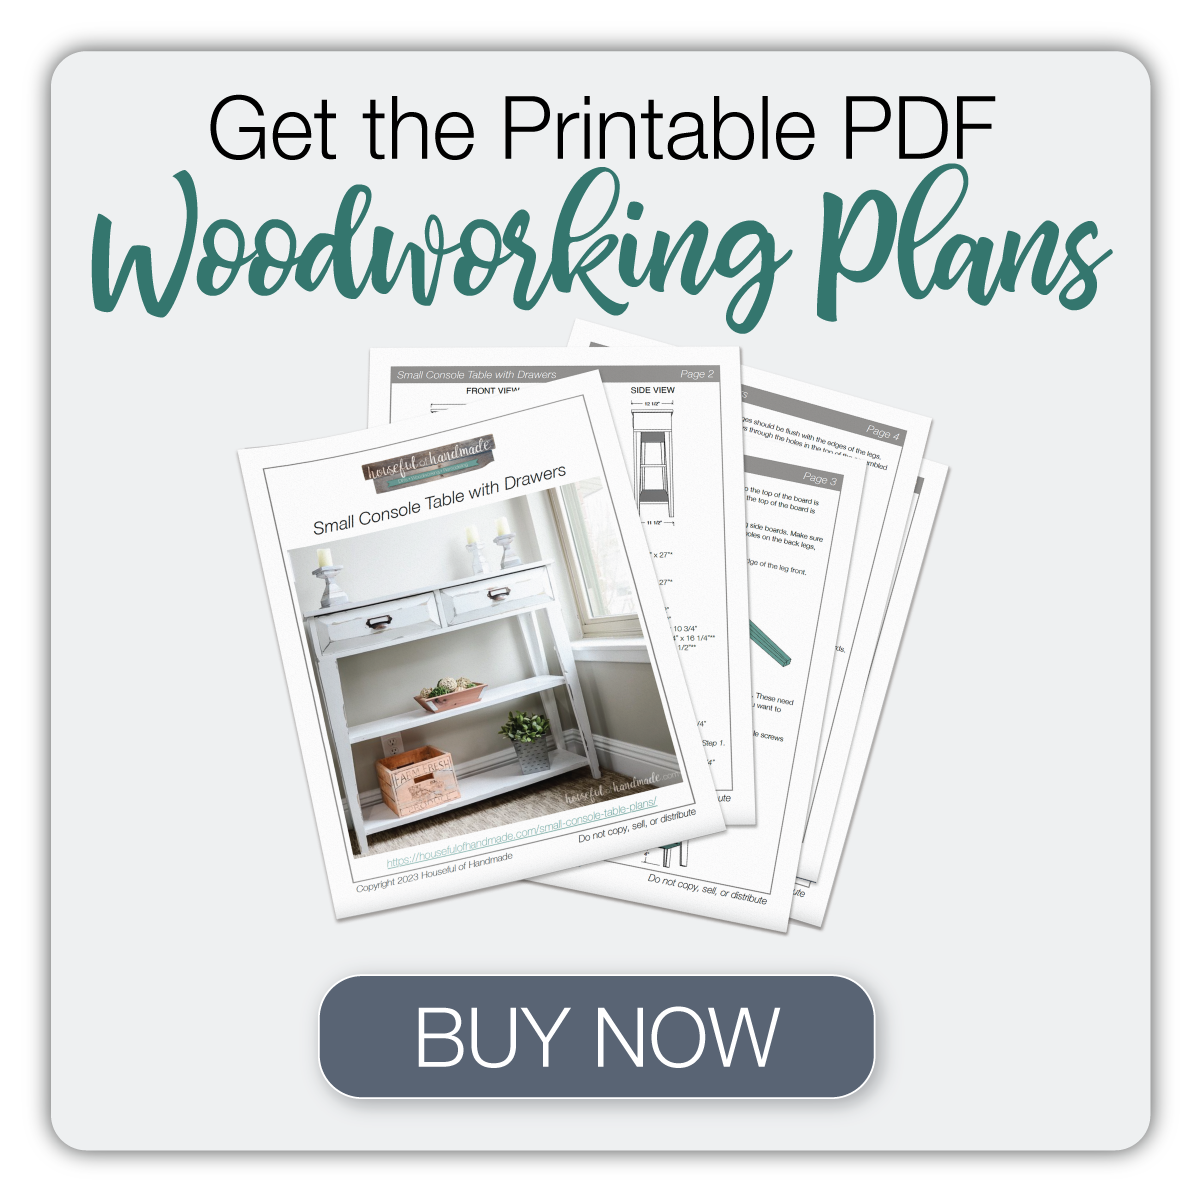 Button to buy the printable PDF plans for the small console table with drawers.